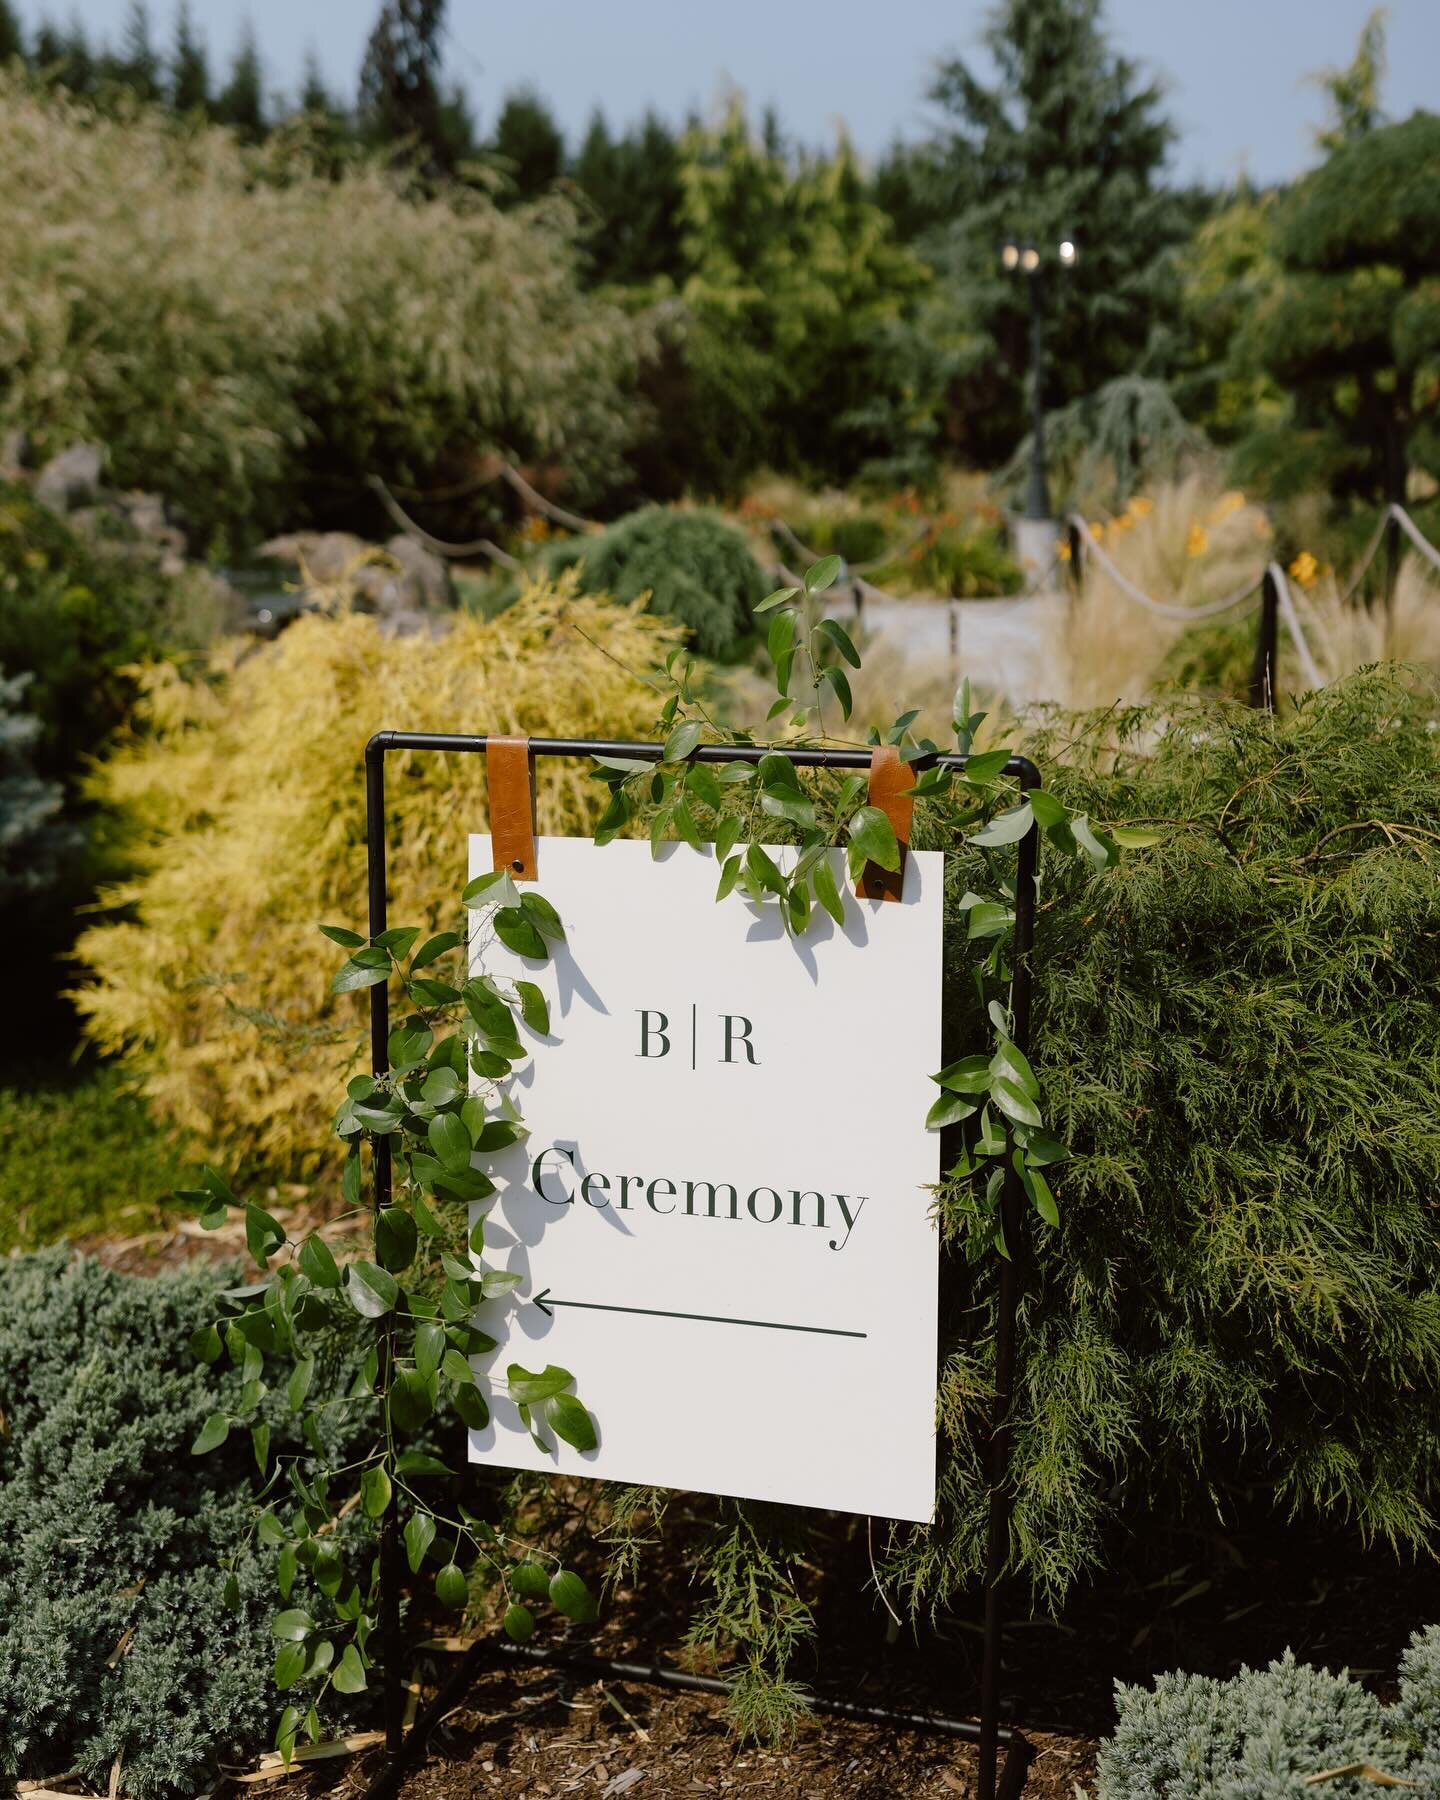 We love signage. 
When the venue has spacious beautiful grounds and multiple areas being used throughout the event, it can really add to the guest experience.
🌿🪧
.
design / plan / coordination led by Meghan
@chefstablecateringpdx
@dreamcakespdx
@sp